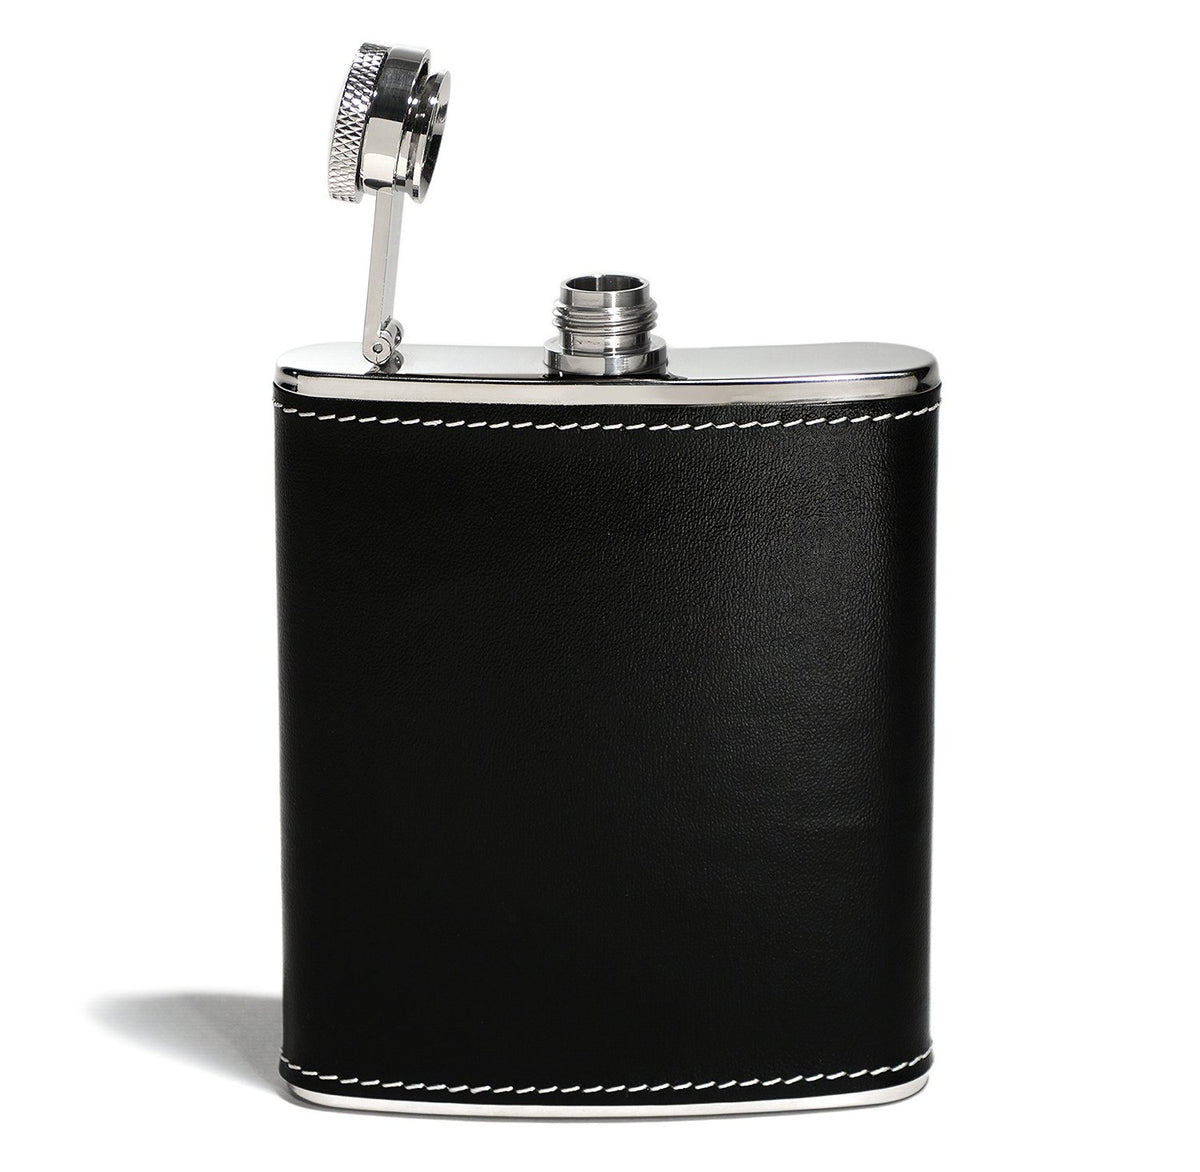 Buy houdini pocket flask - Online store for barware, flasks in USA, on sale, low price, discount deals, coupon code